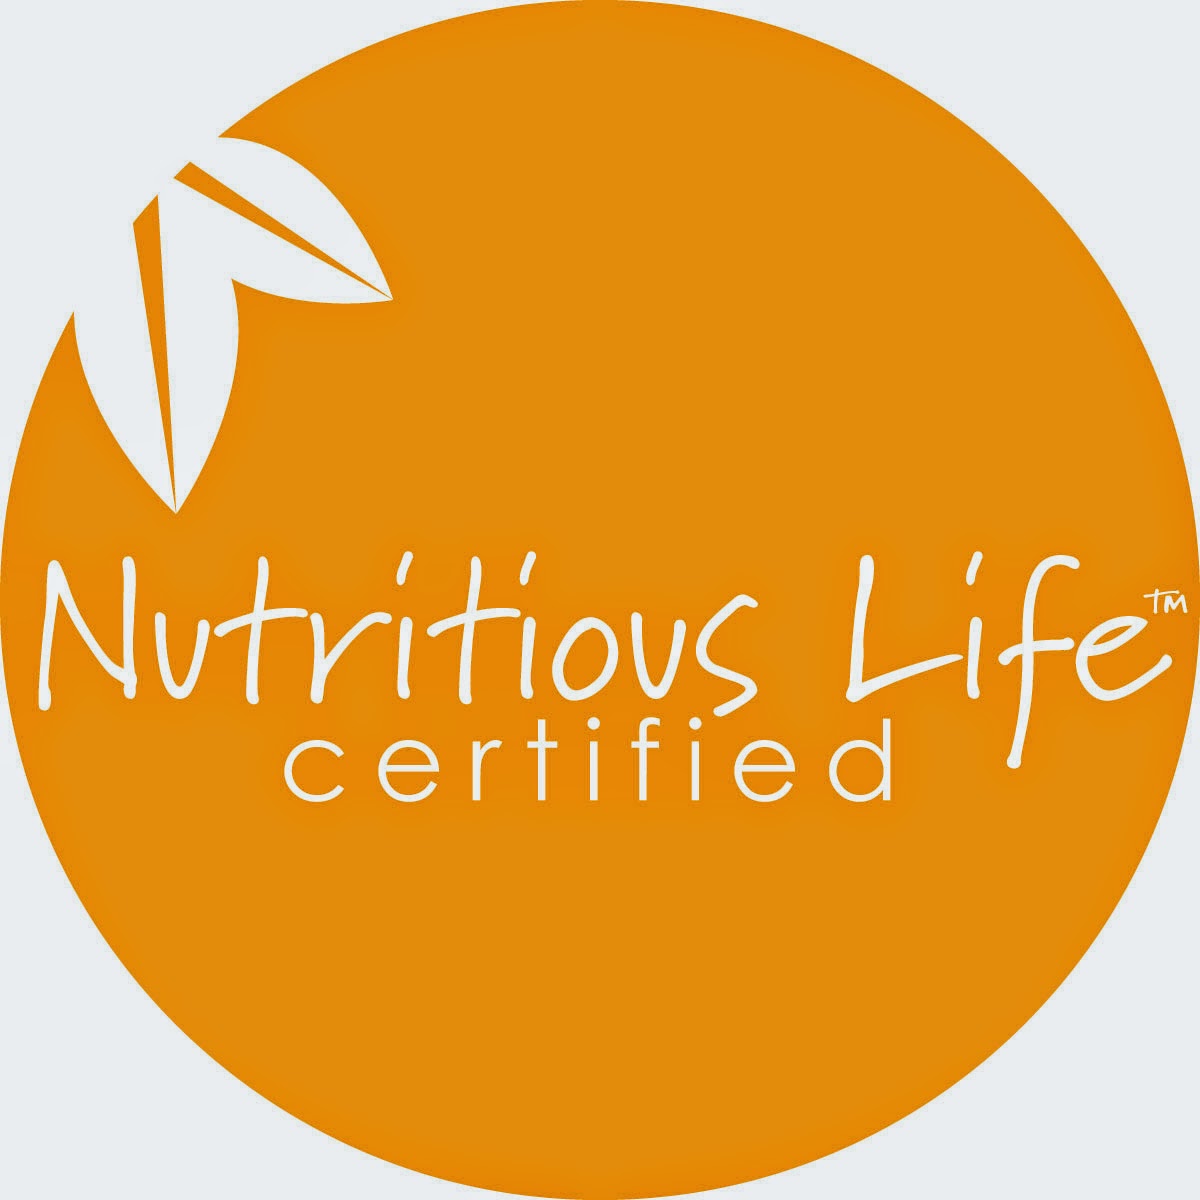 Nutritious Life Certified